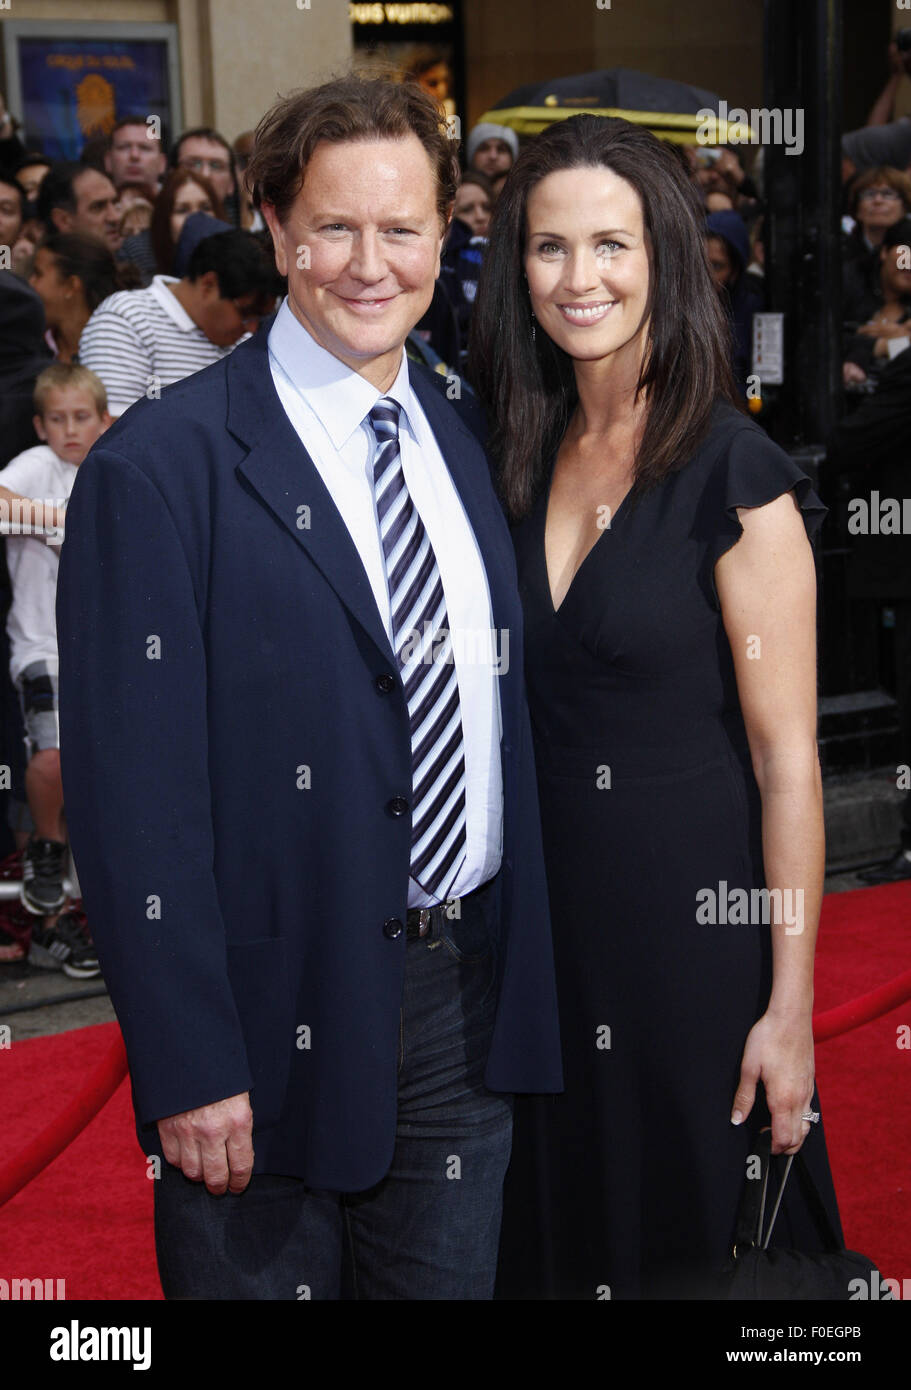 Judge Reinhold and Amy Reinhold at the Los Angeles premiere of 'Prince ...